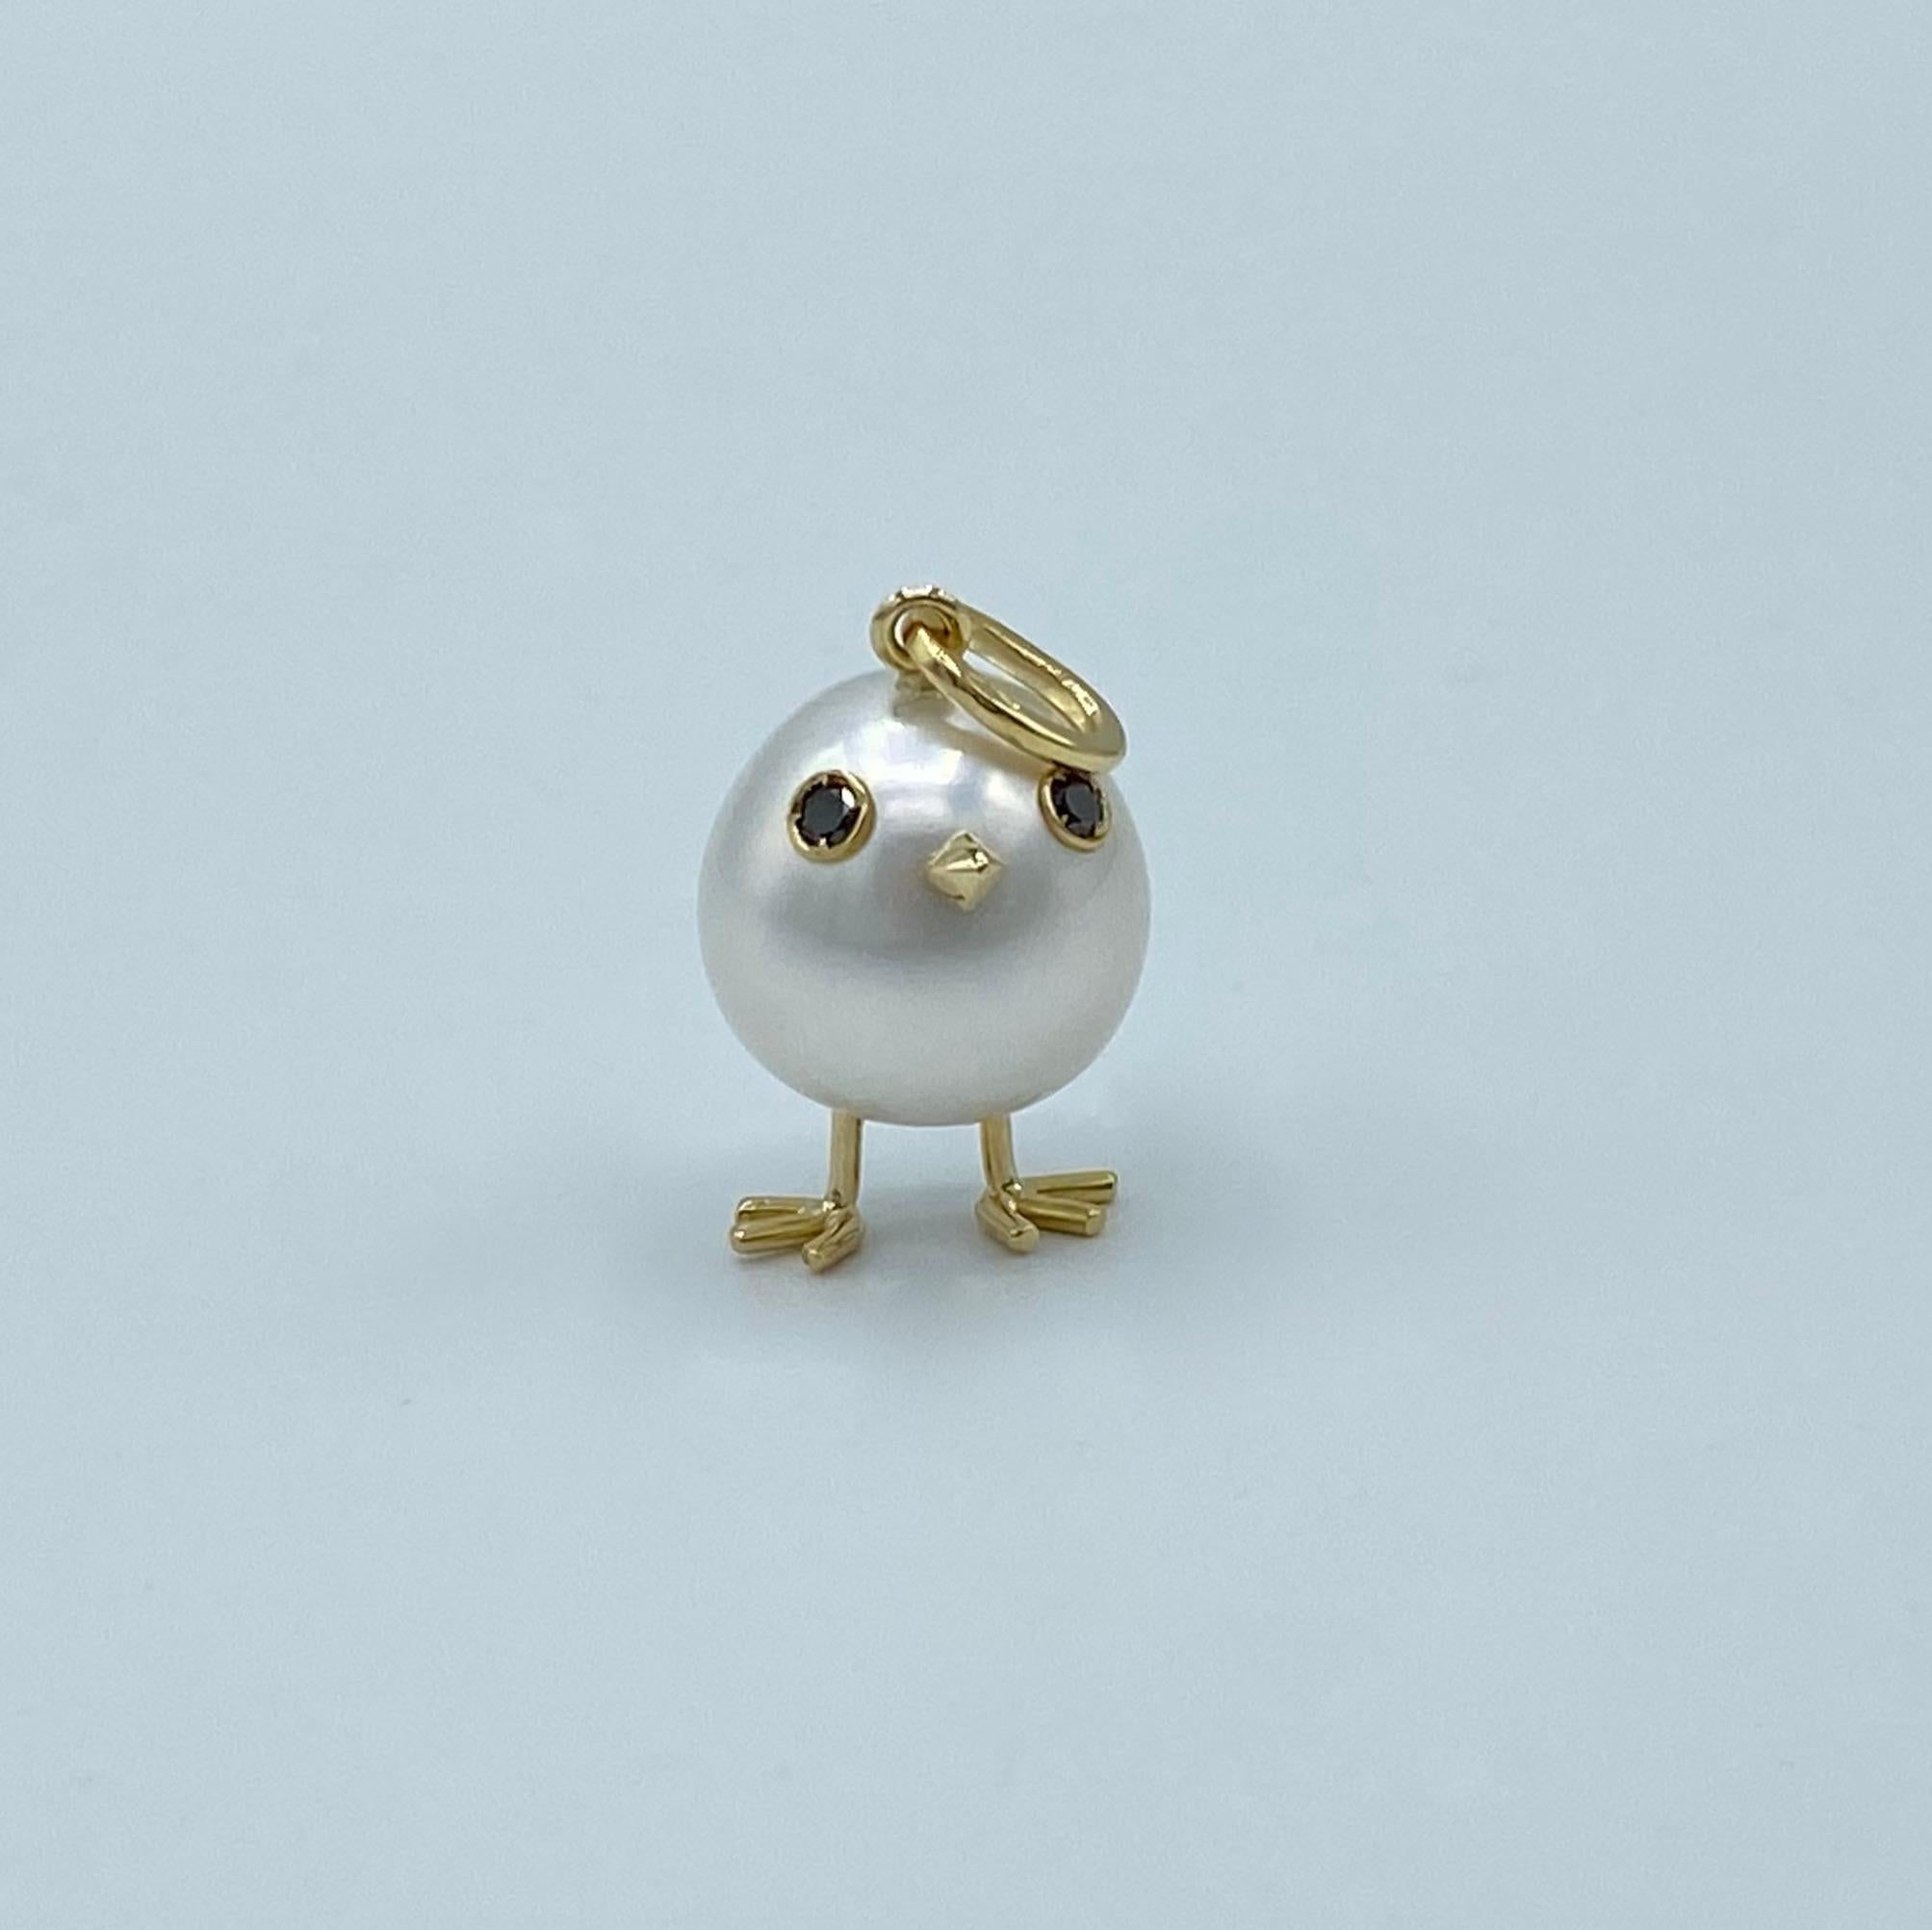 Chick Australian Pearl Black Diamond Yellow  18Kt Gold Pendant or Necklace
A oval shape Australian pearl has been carefully crafted to make a chick. He has his two legs, two eyes encrusted with two white diamonds and his beak. 
The 18KT gold is